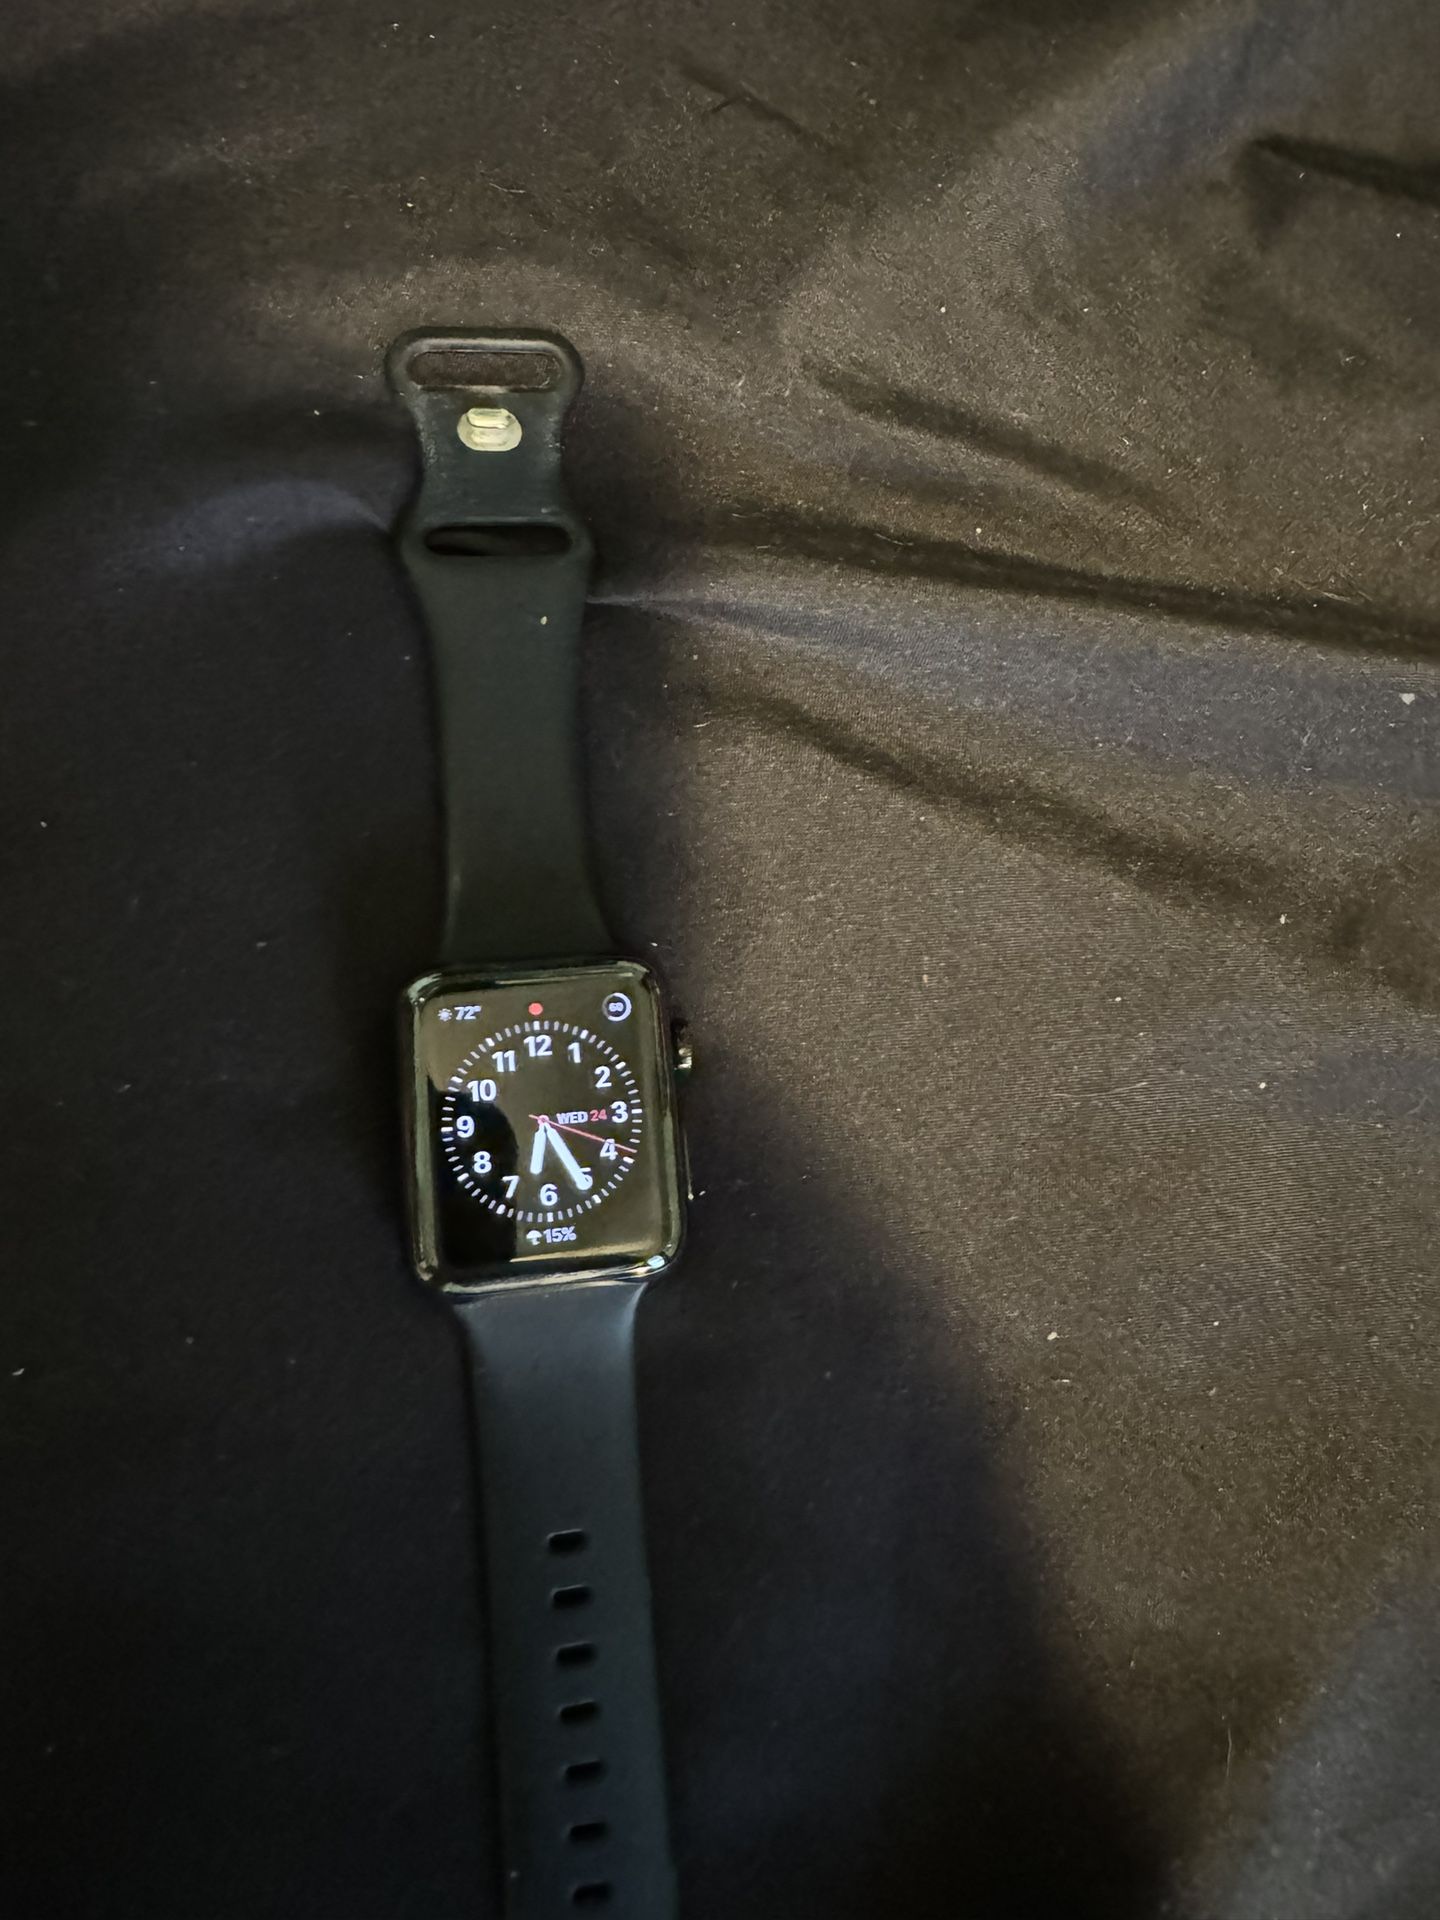 Apple Watch Series 3. Stainless steel case Sapphire crystal glass